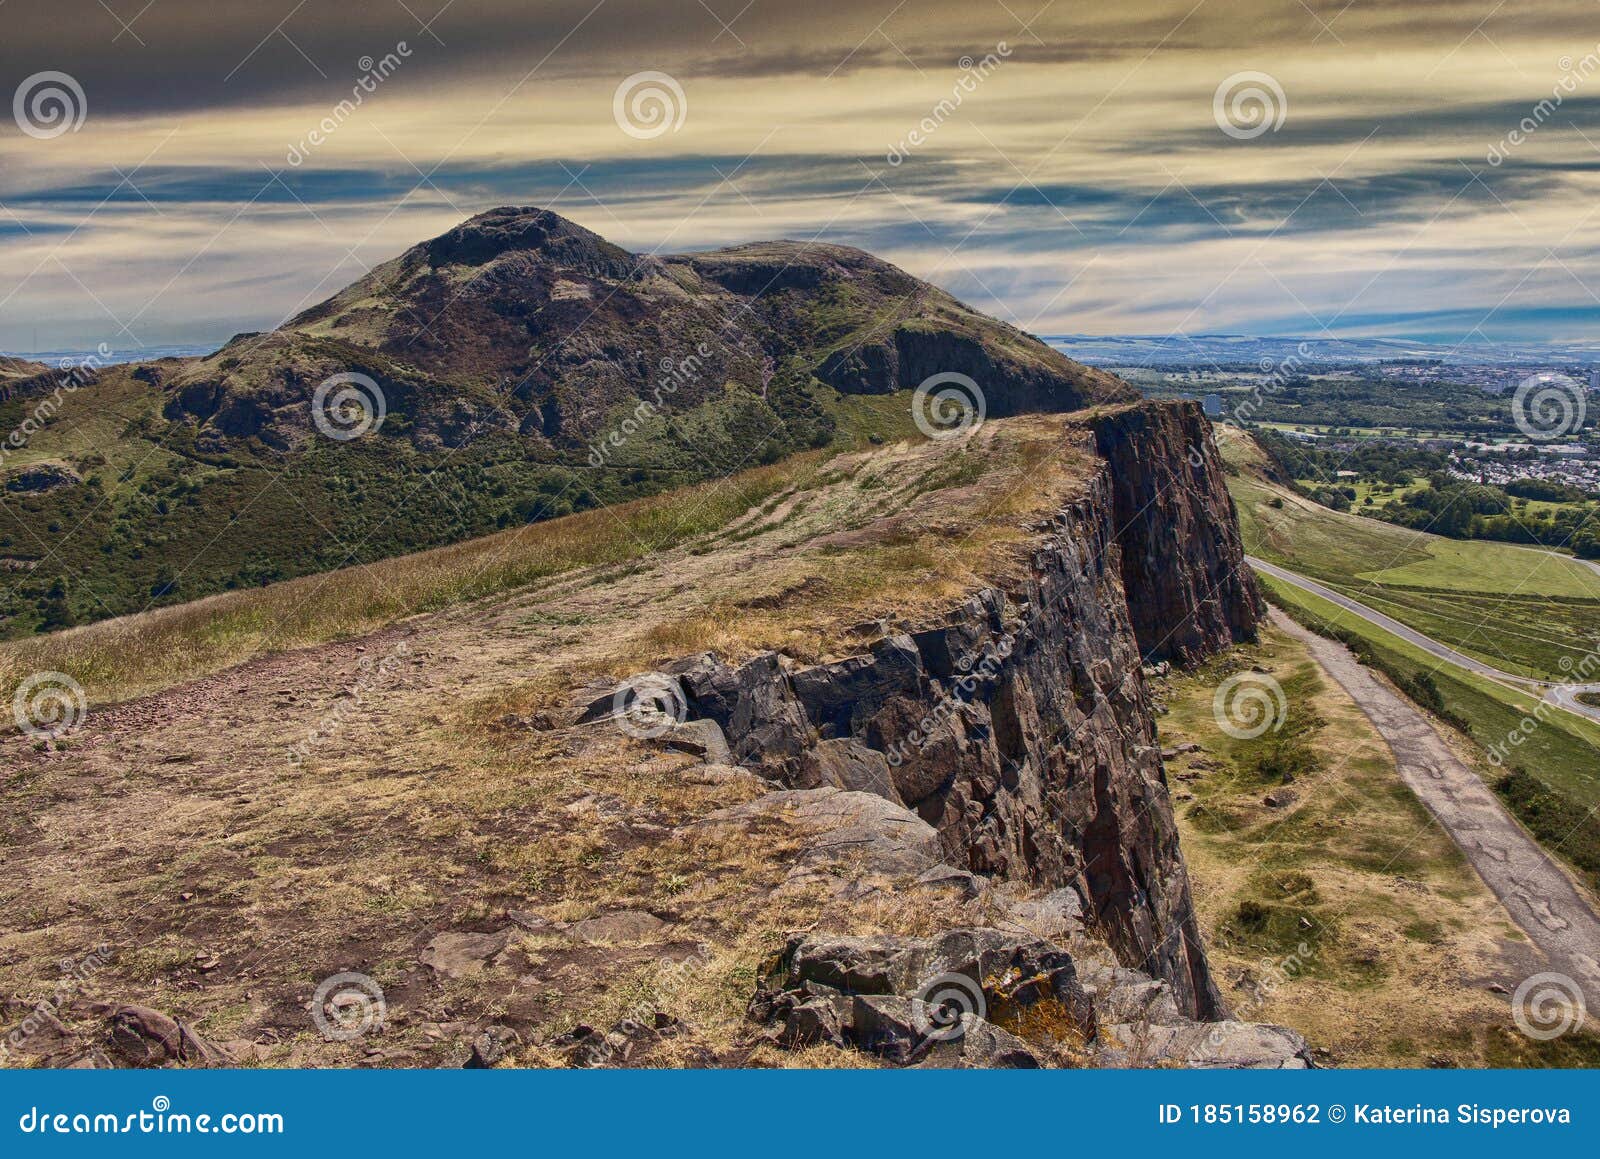 beautiful landscape of arthur`s seat mountain in scotland with path on the cliff and edinburgh city in the background